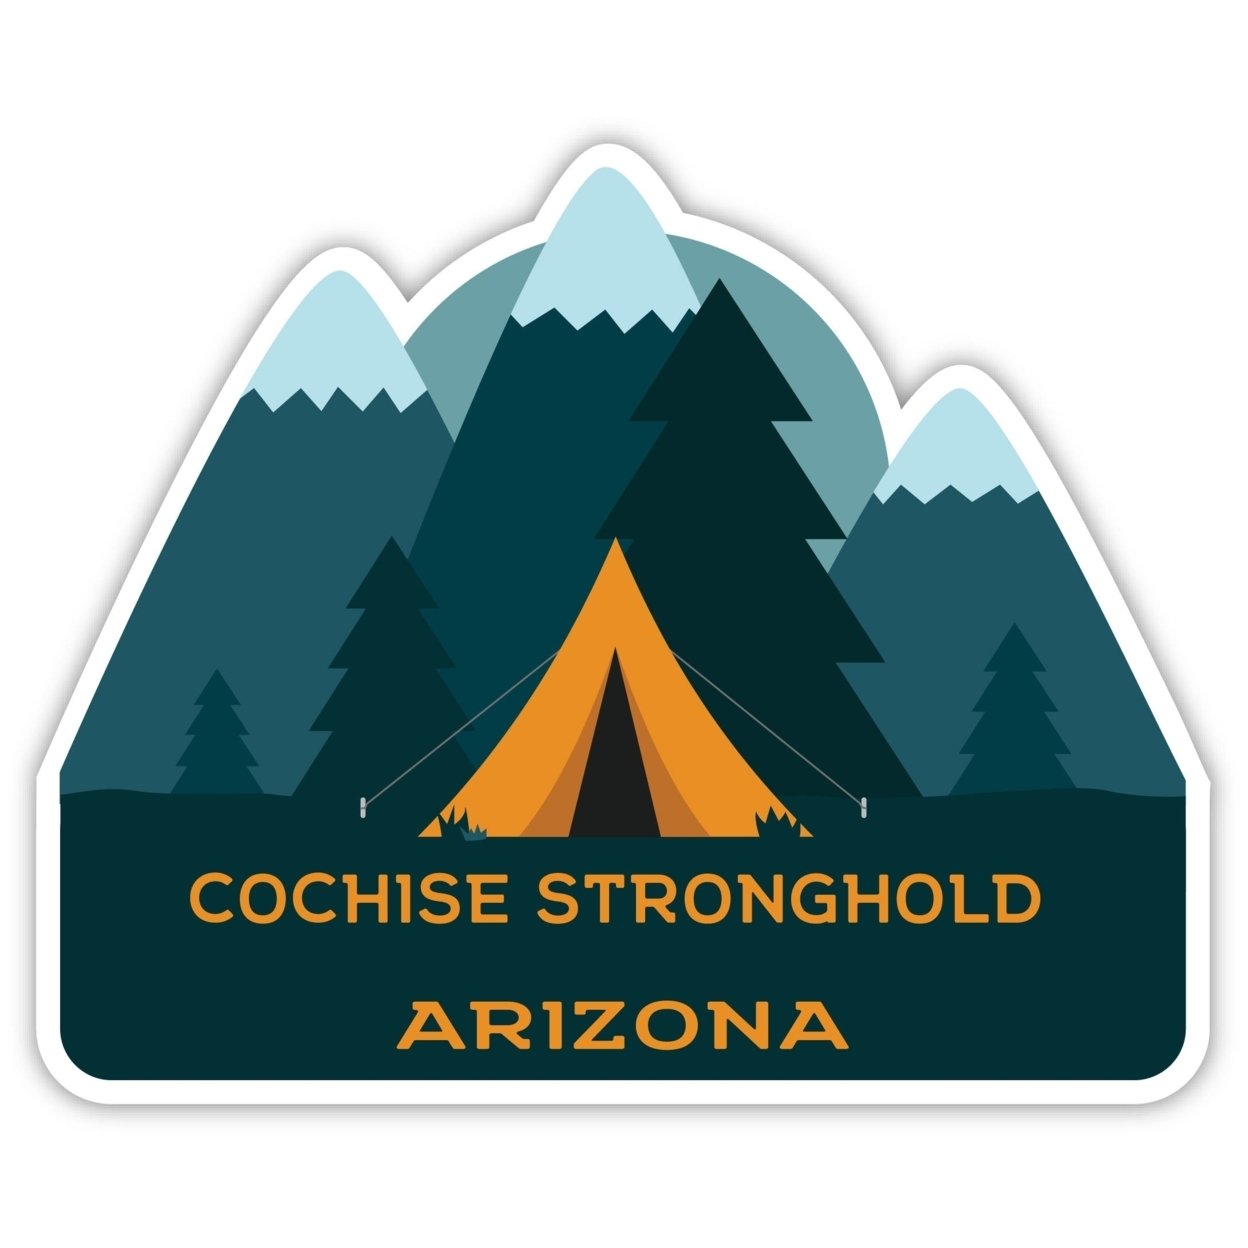 Cochise Stronghold Arizona Souvenir Decorative Stickers (Choose Theme And Size) - 4-Pack, 6-Inch, Tent